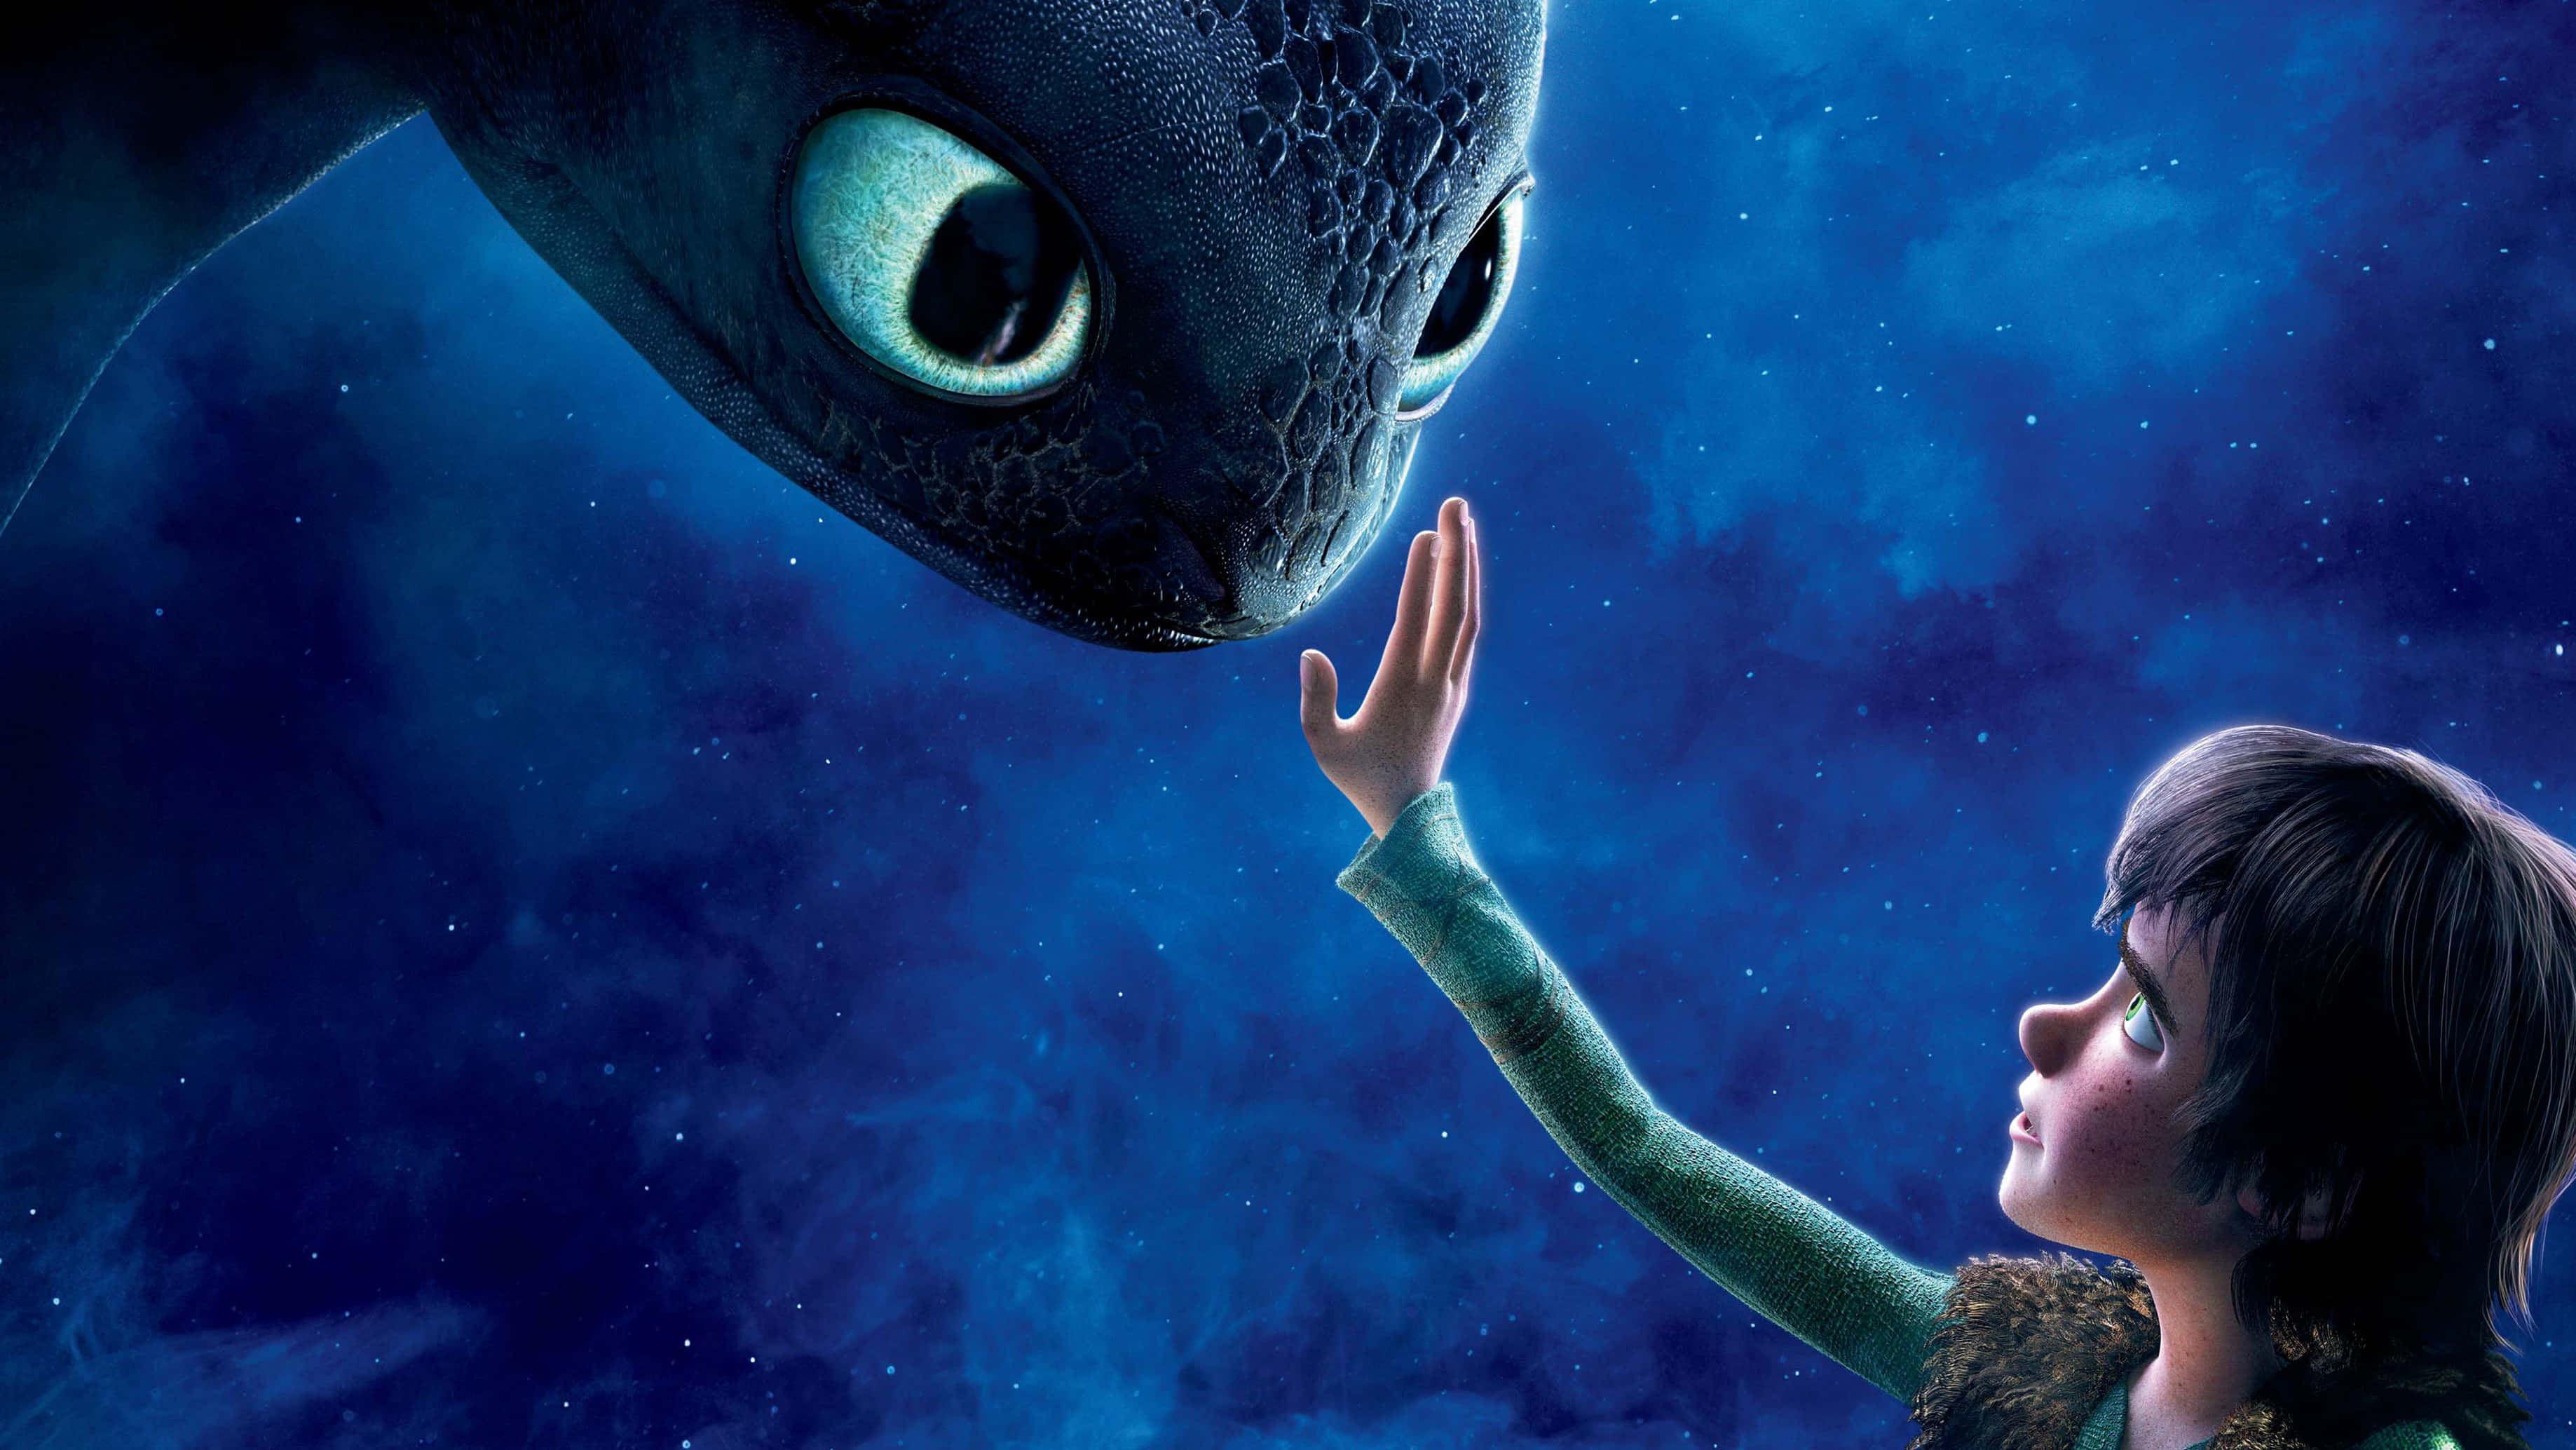 DreamWorks' 'How to Train Your Dragon' in 4k Wallpaper